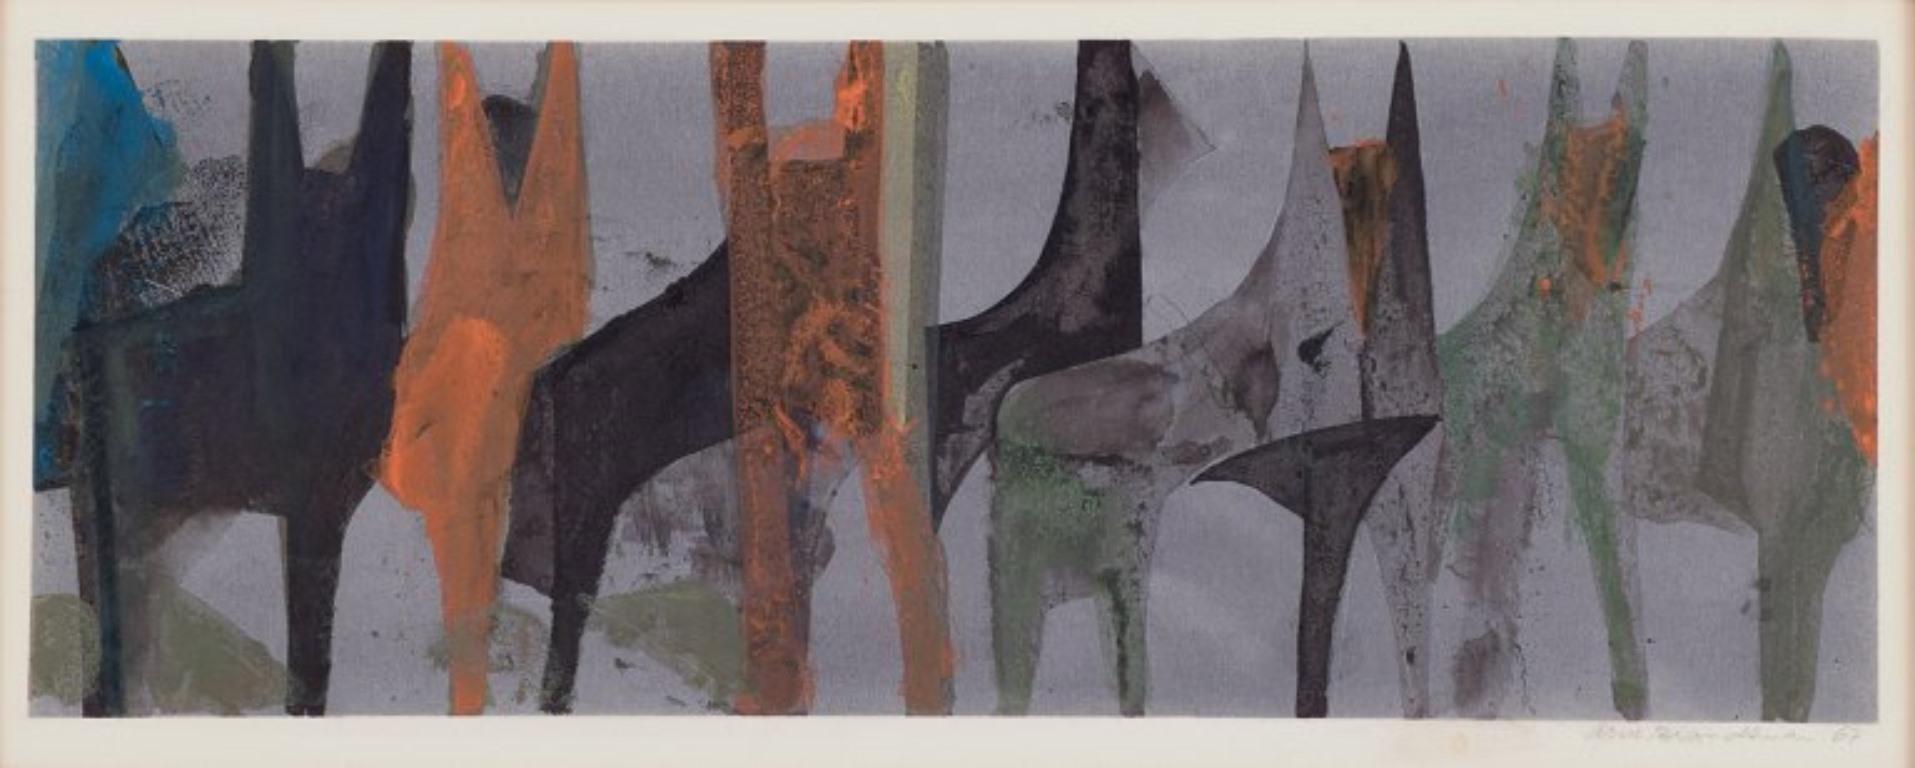 Arne Brandtman (1925-2010), Swedish artist. 
Color print on paper.
Abstract composition.
Hand-signed in pencil and dated 67.
In perfect condition.
Image dimensions: 43.5 cm x 6.5 cm.
Total dimensions: 46.0 cm x 20.0 cm.

